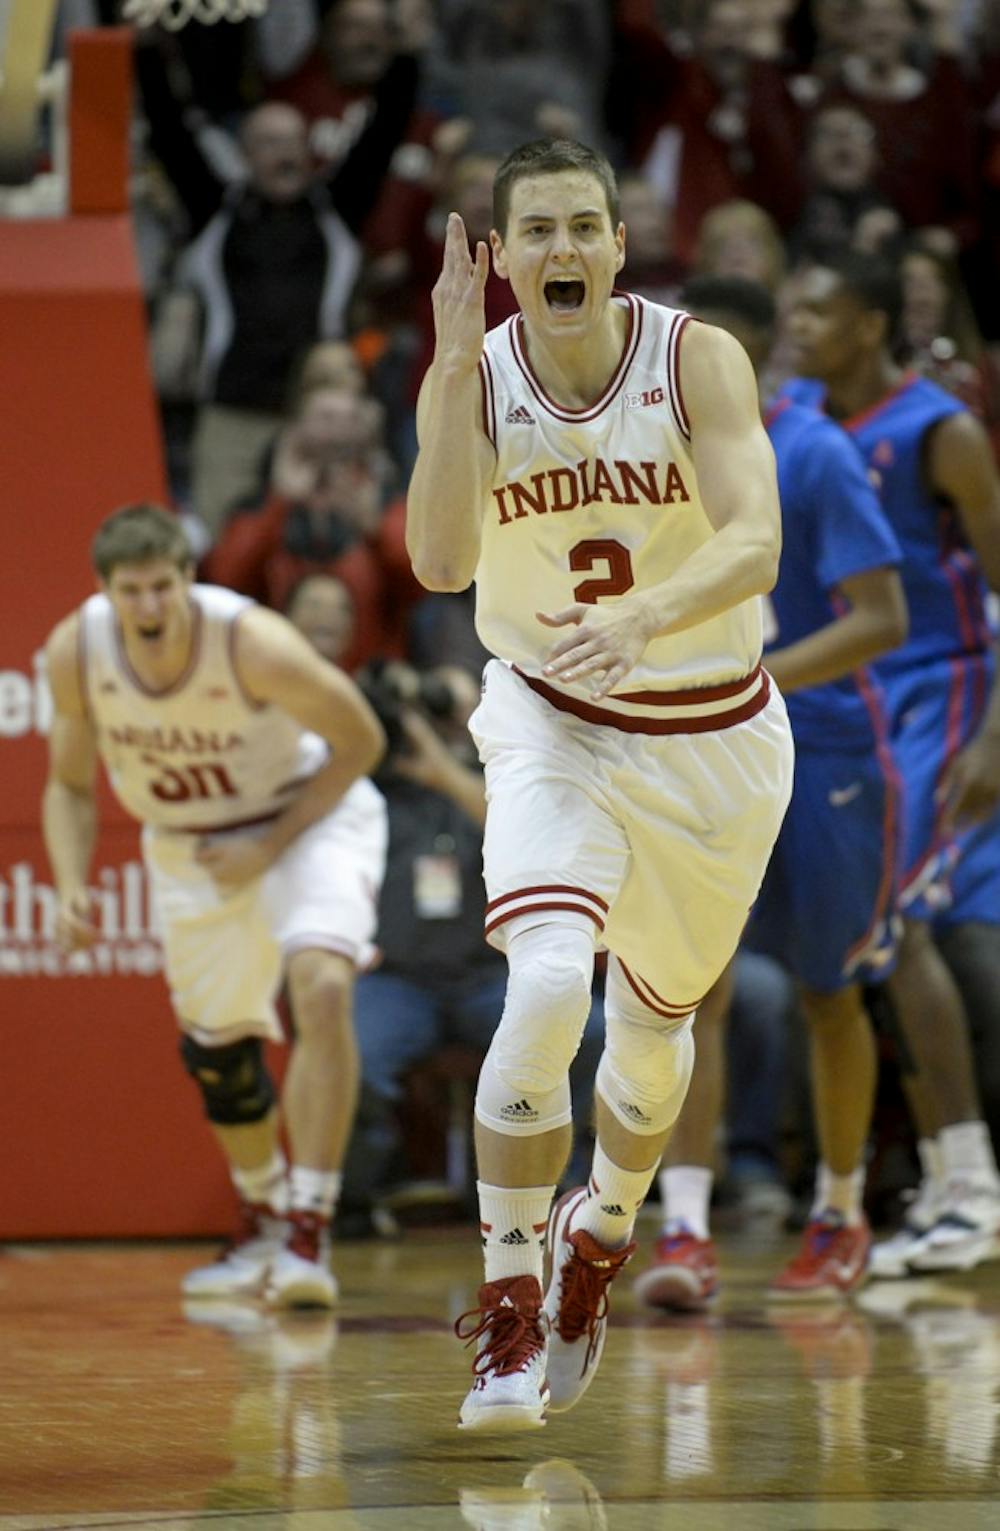 Junior Nick Zeisloft celebrates after making a three pointer late in IU's 74-68 victory against Southern Methodist on Thursday at Assembly Hall. Ziesloft's shot put the Hoosiers up 60-52 on the Mustangs late in the 2nd half. 